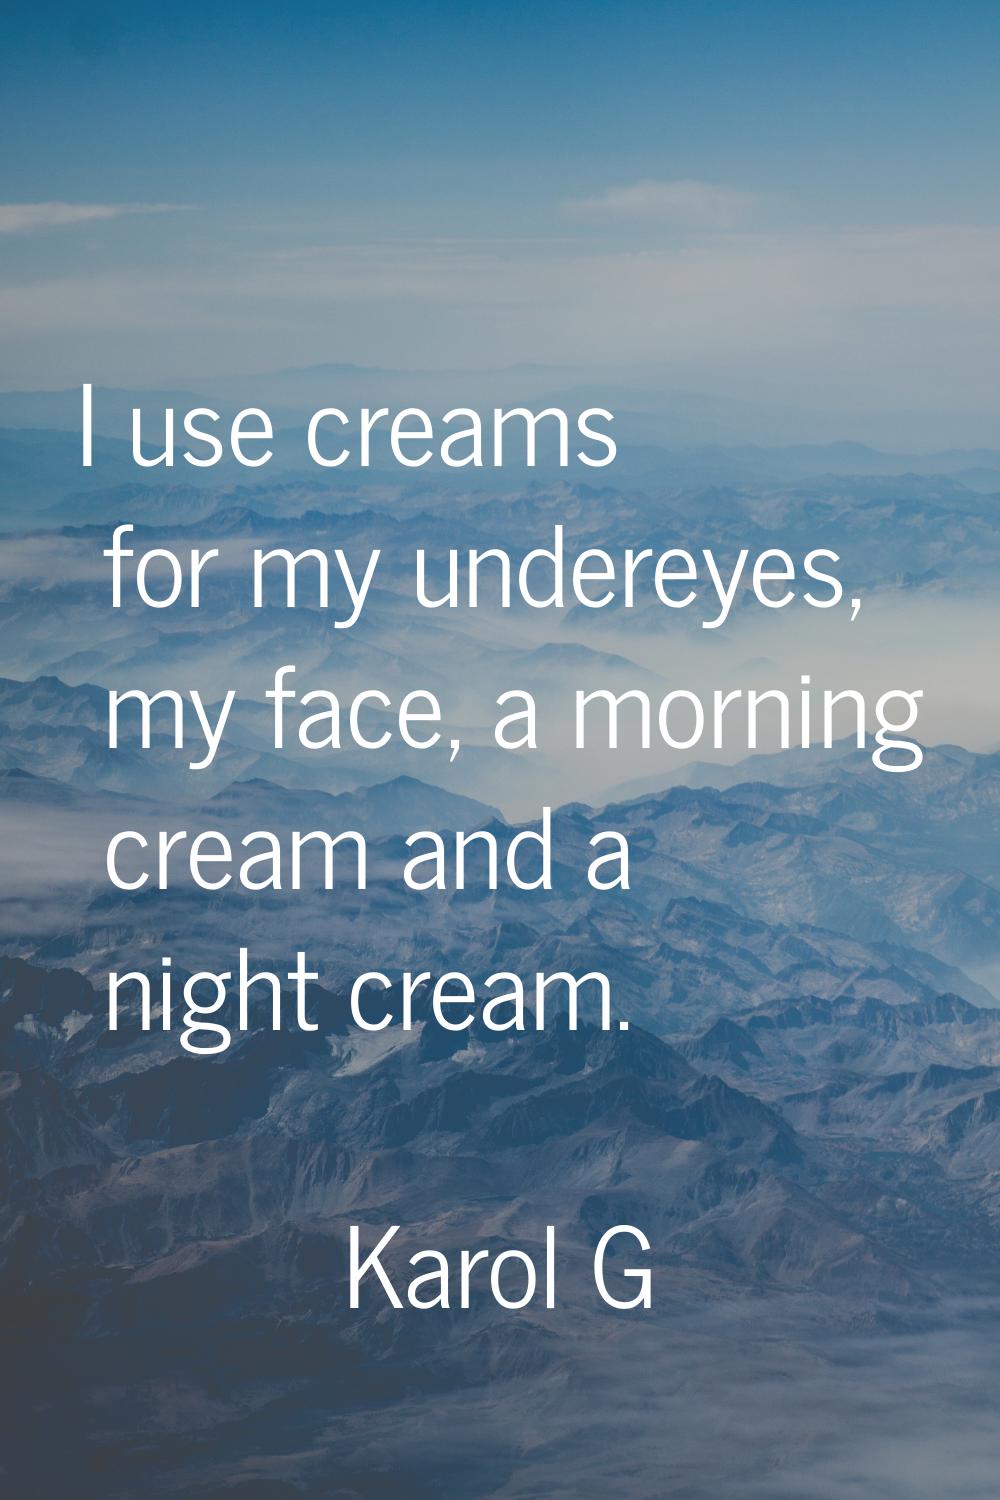 I use creams for my undereyes, my face, a morning cream and a night cream.